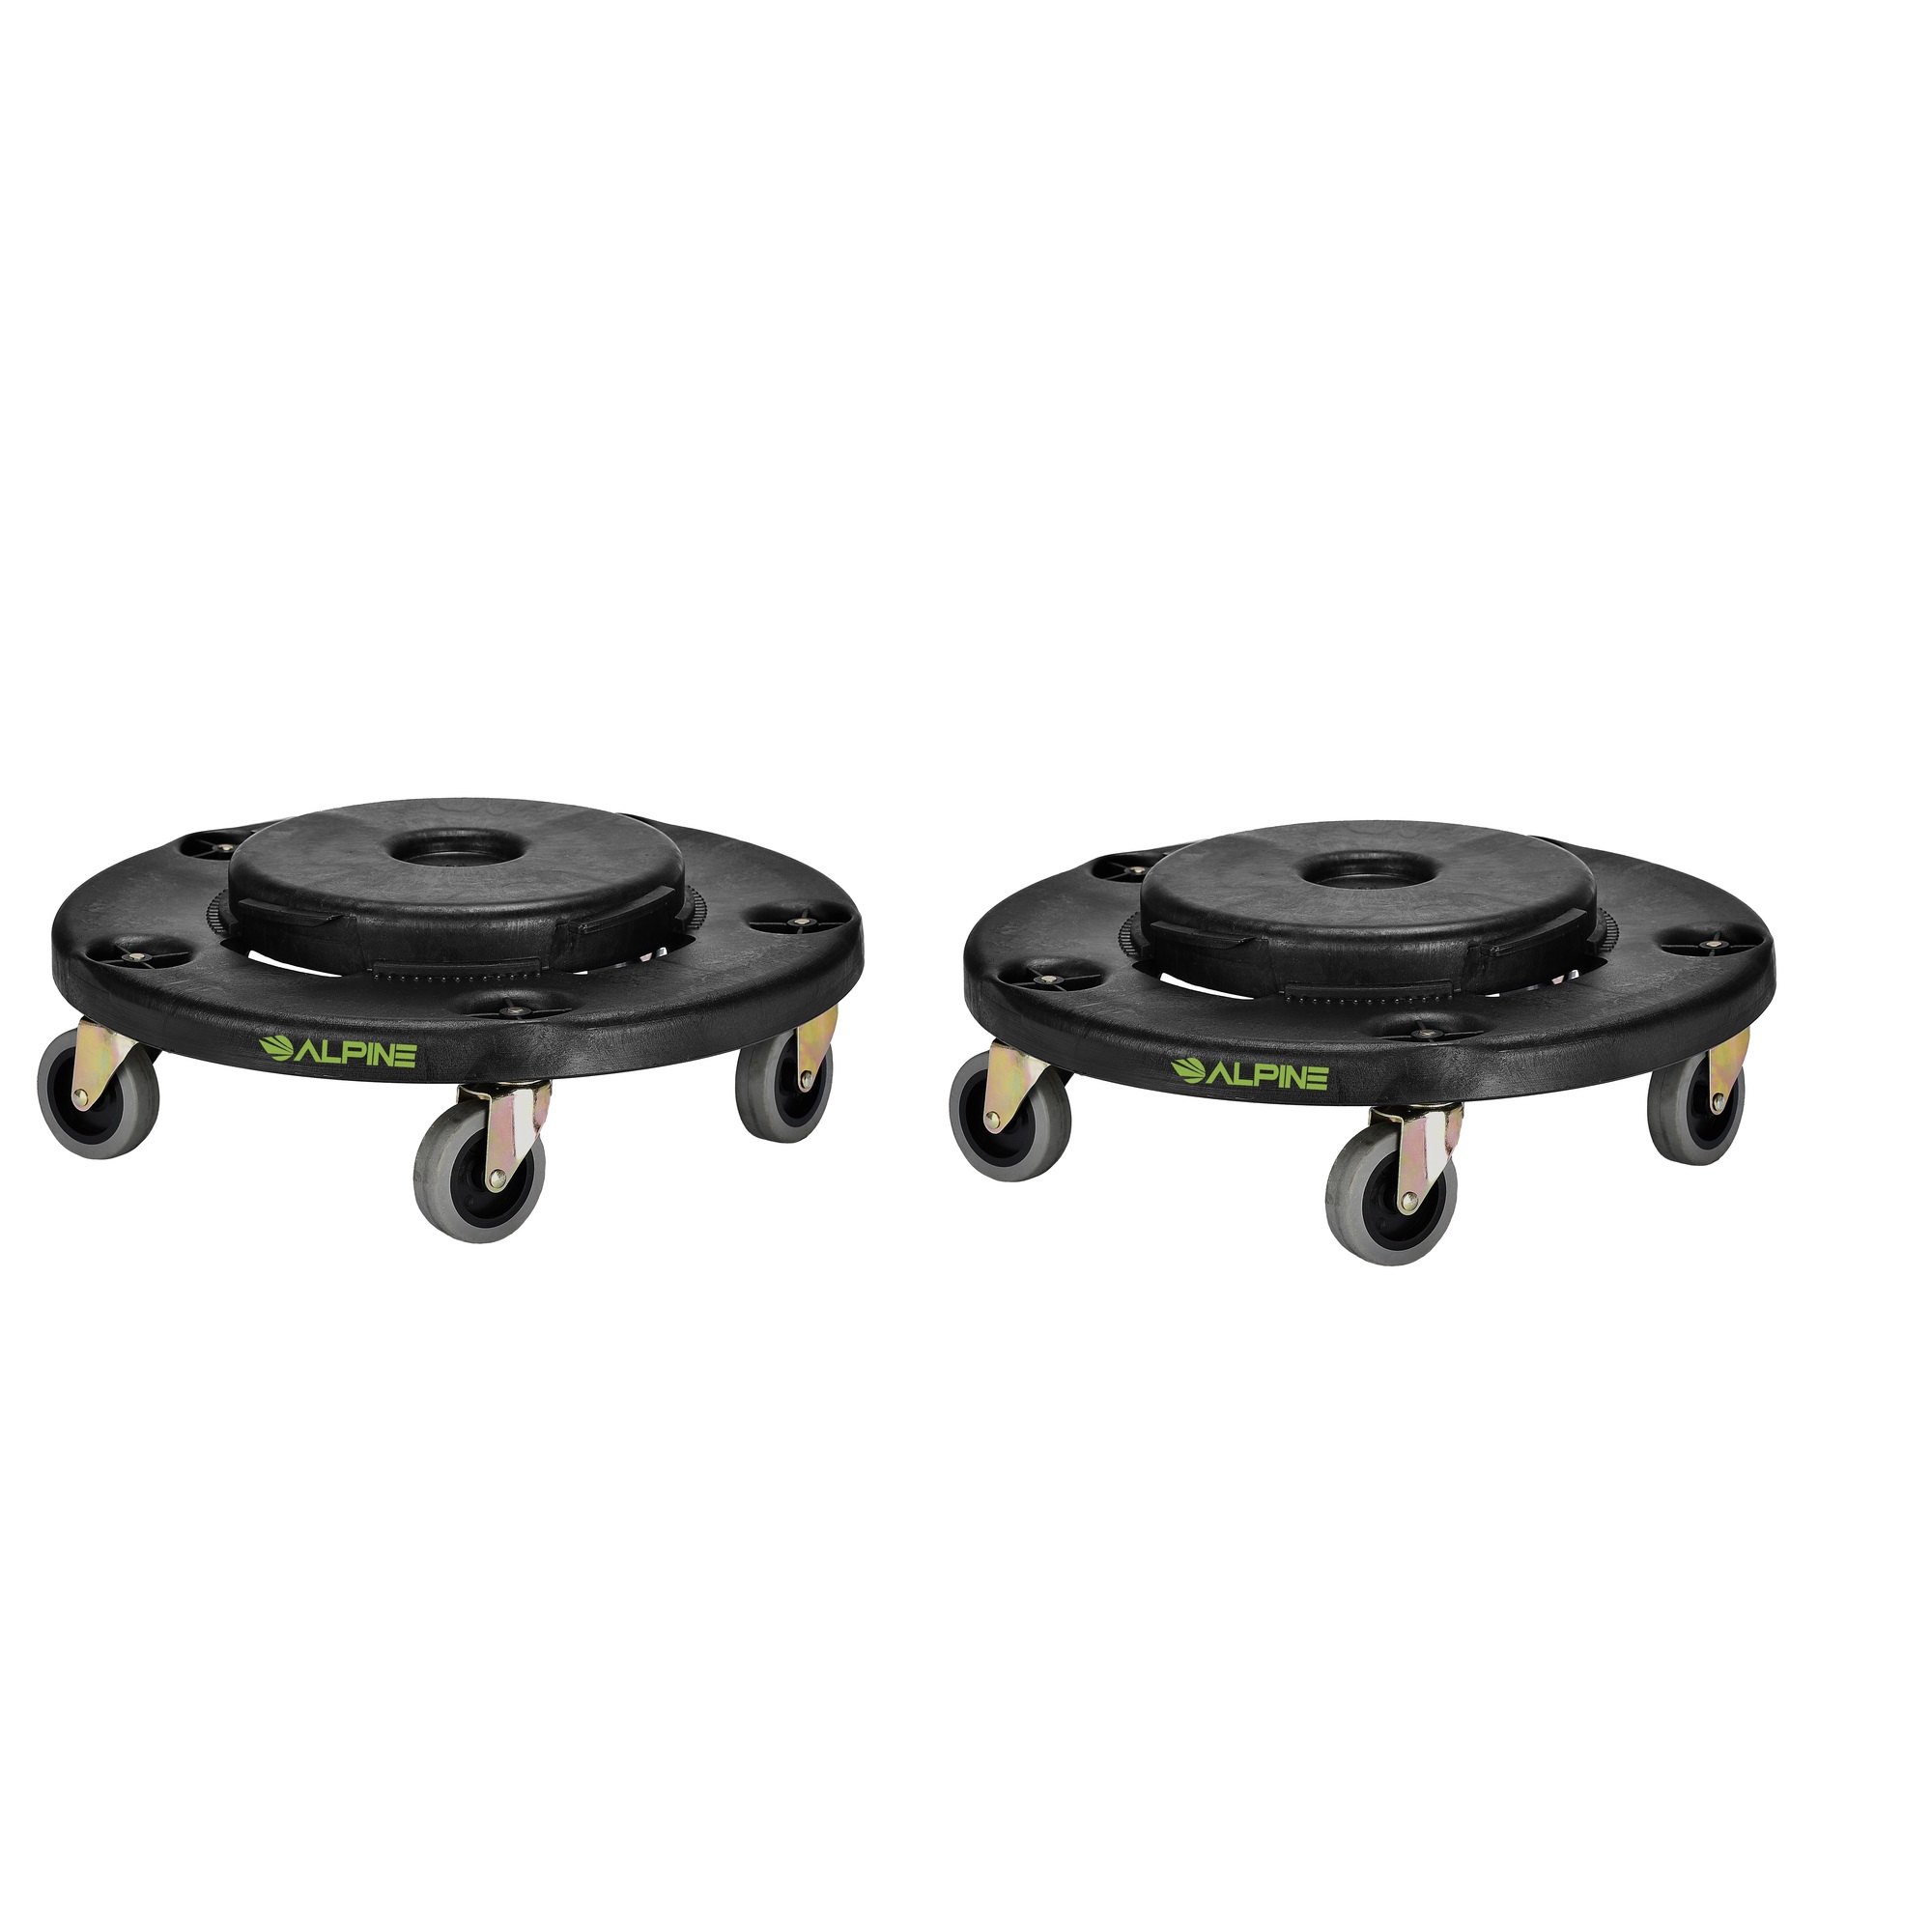 Alpine, Round Trash Can Dolly, Package Of 2 Model ALP471-32-DOLLY-2pk